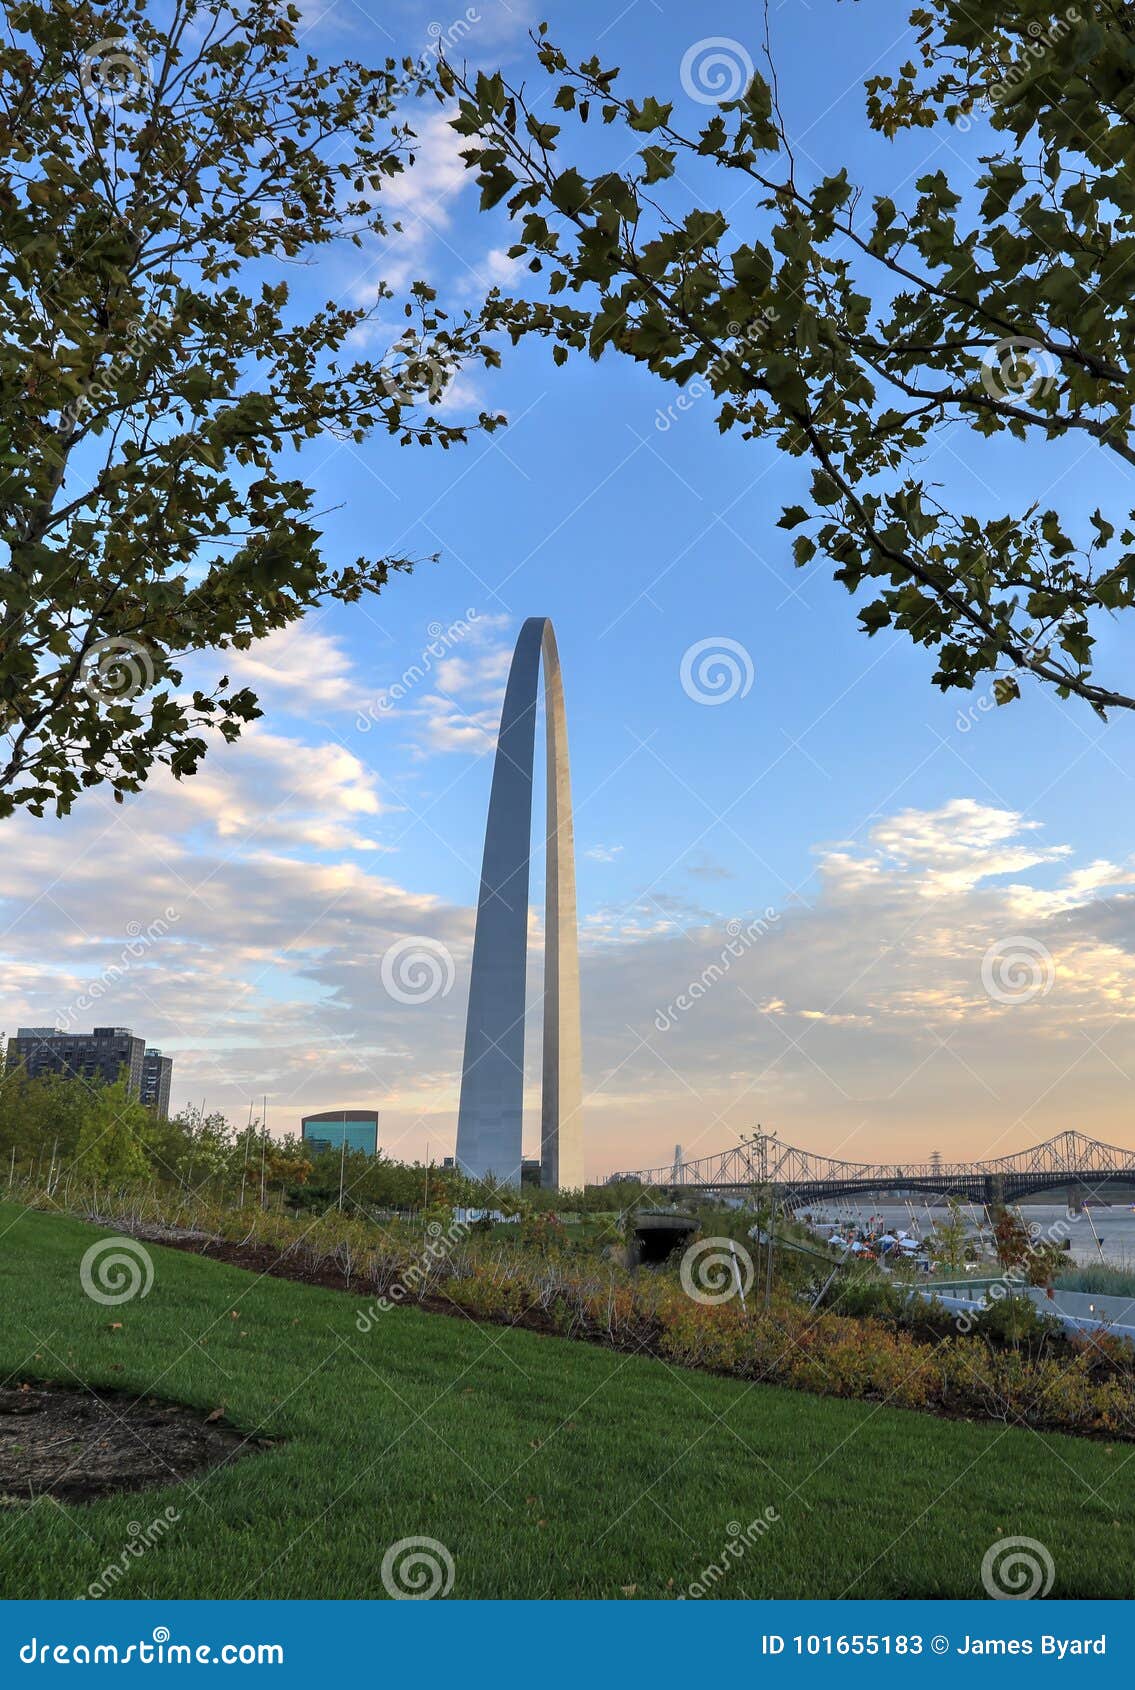 Gateway Arch In St. Louis, Missouri Stock Image - Image of waterfront, building: 101655183